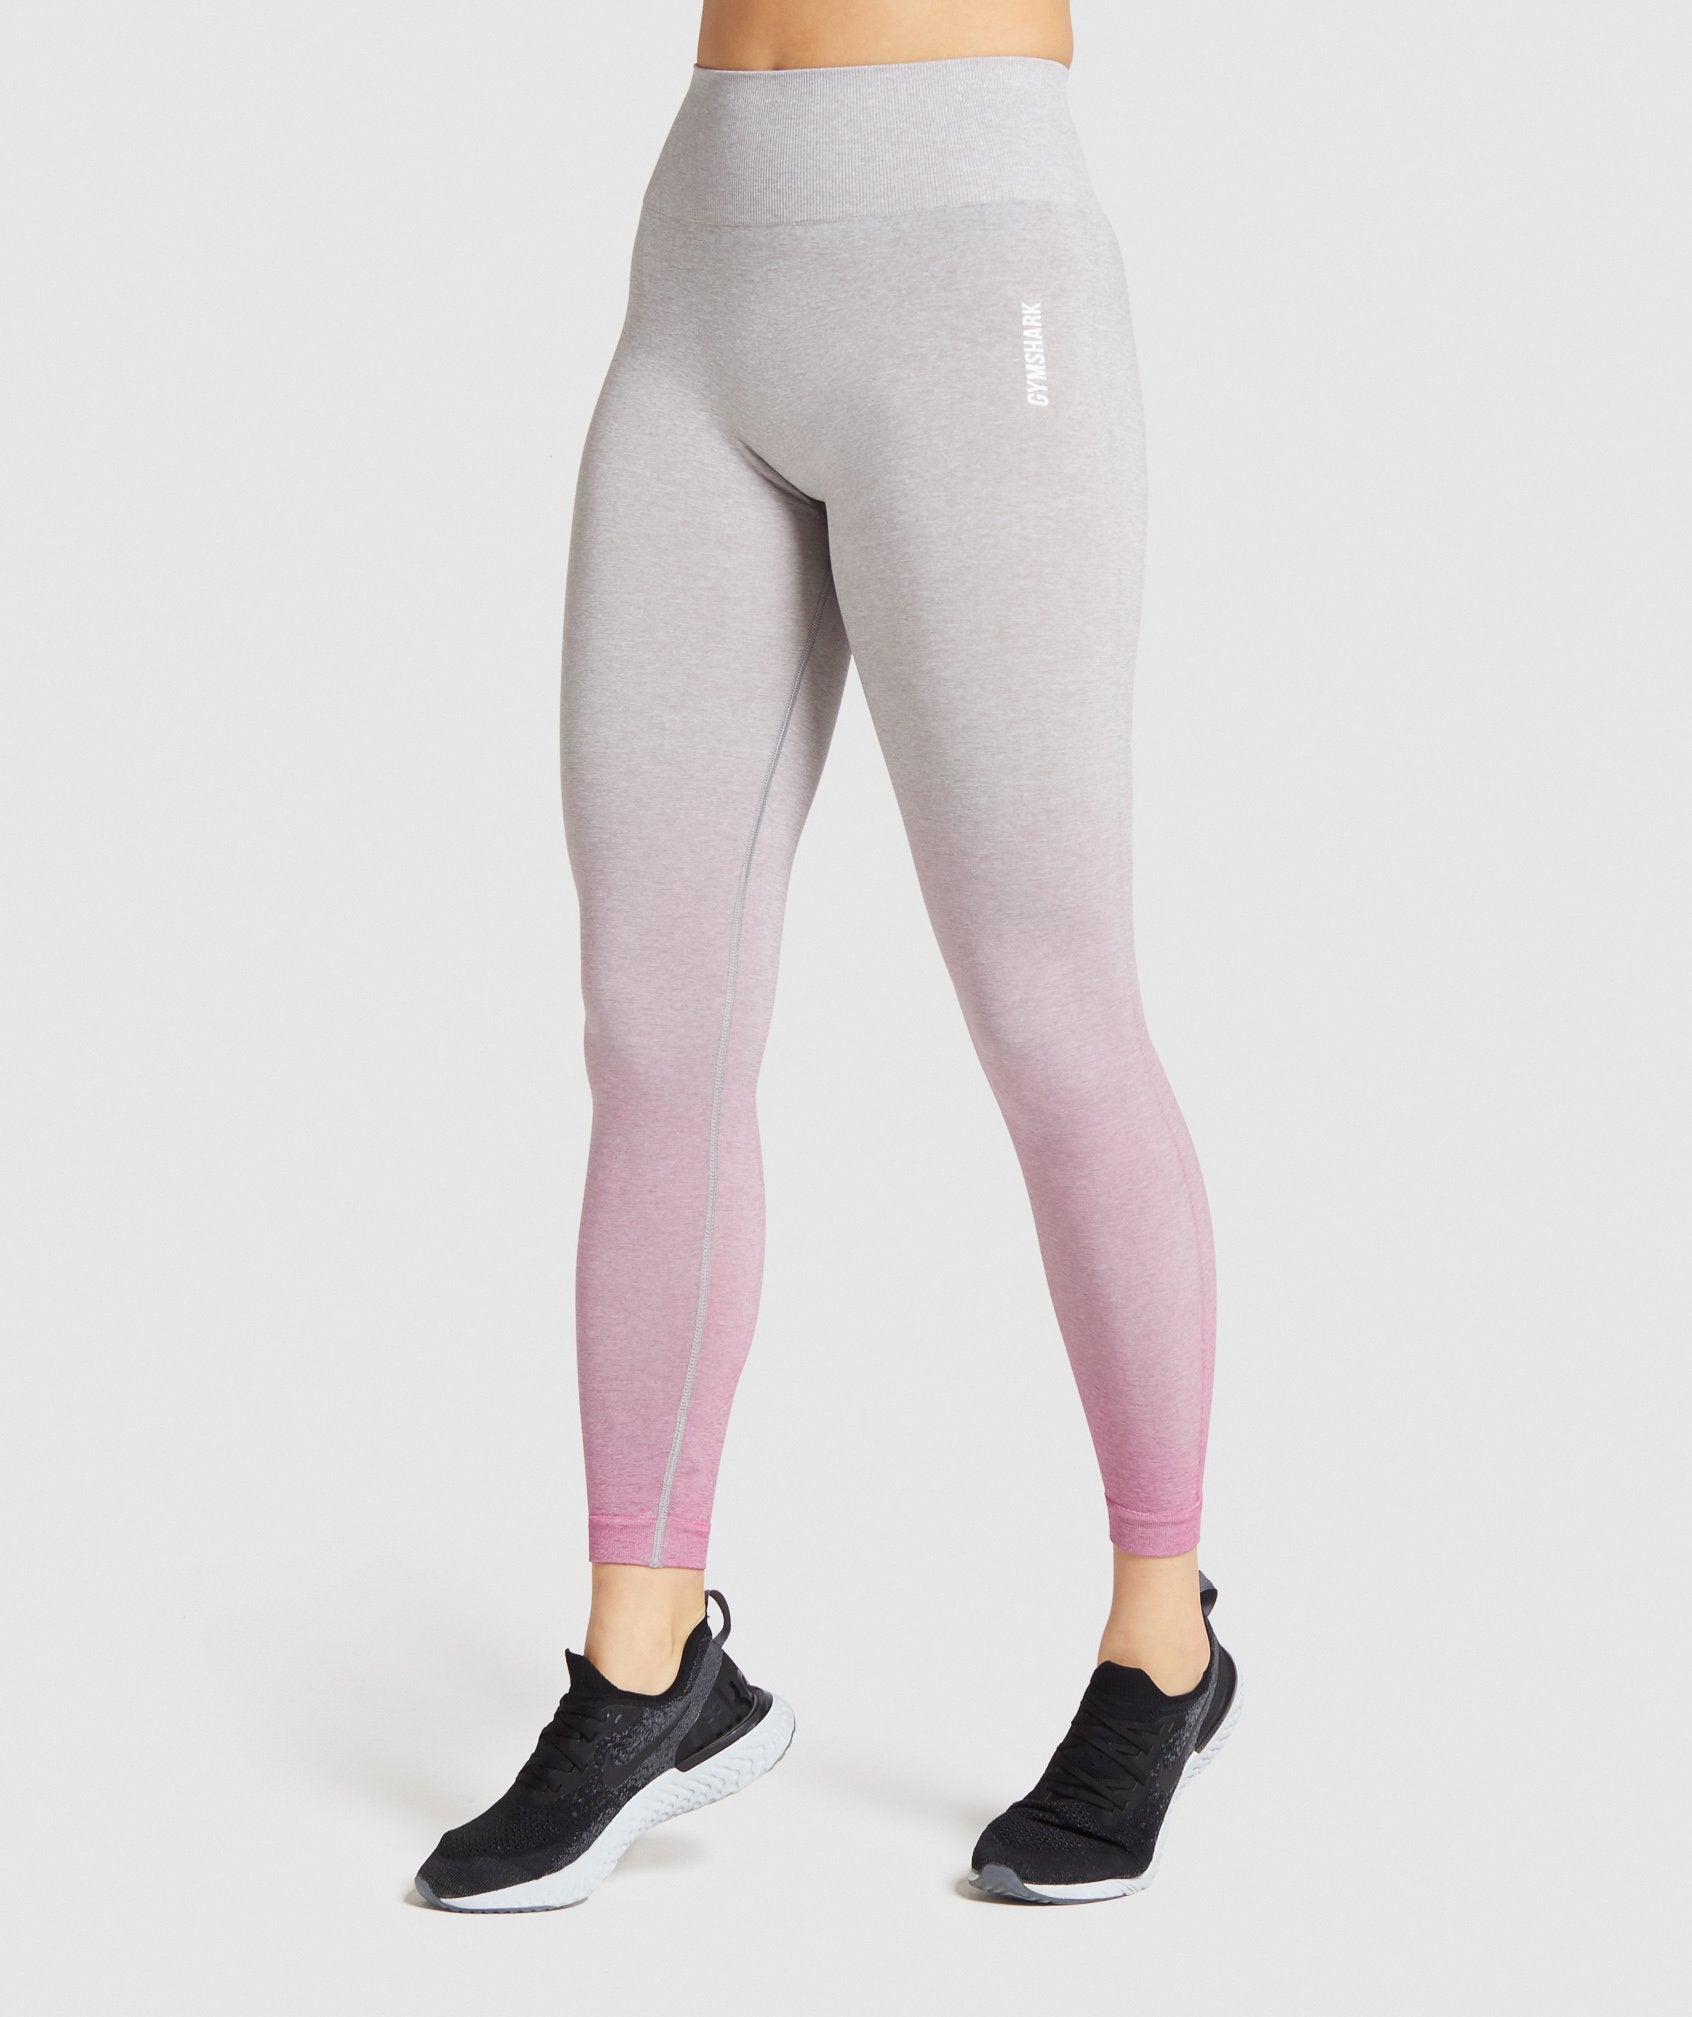 Adapt Ombre Seamless Leggings in Light Grey Marl/Pink - view 1